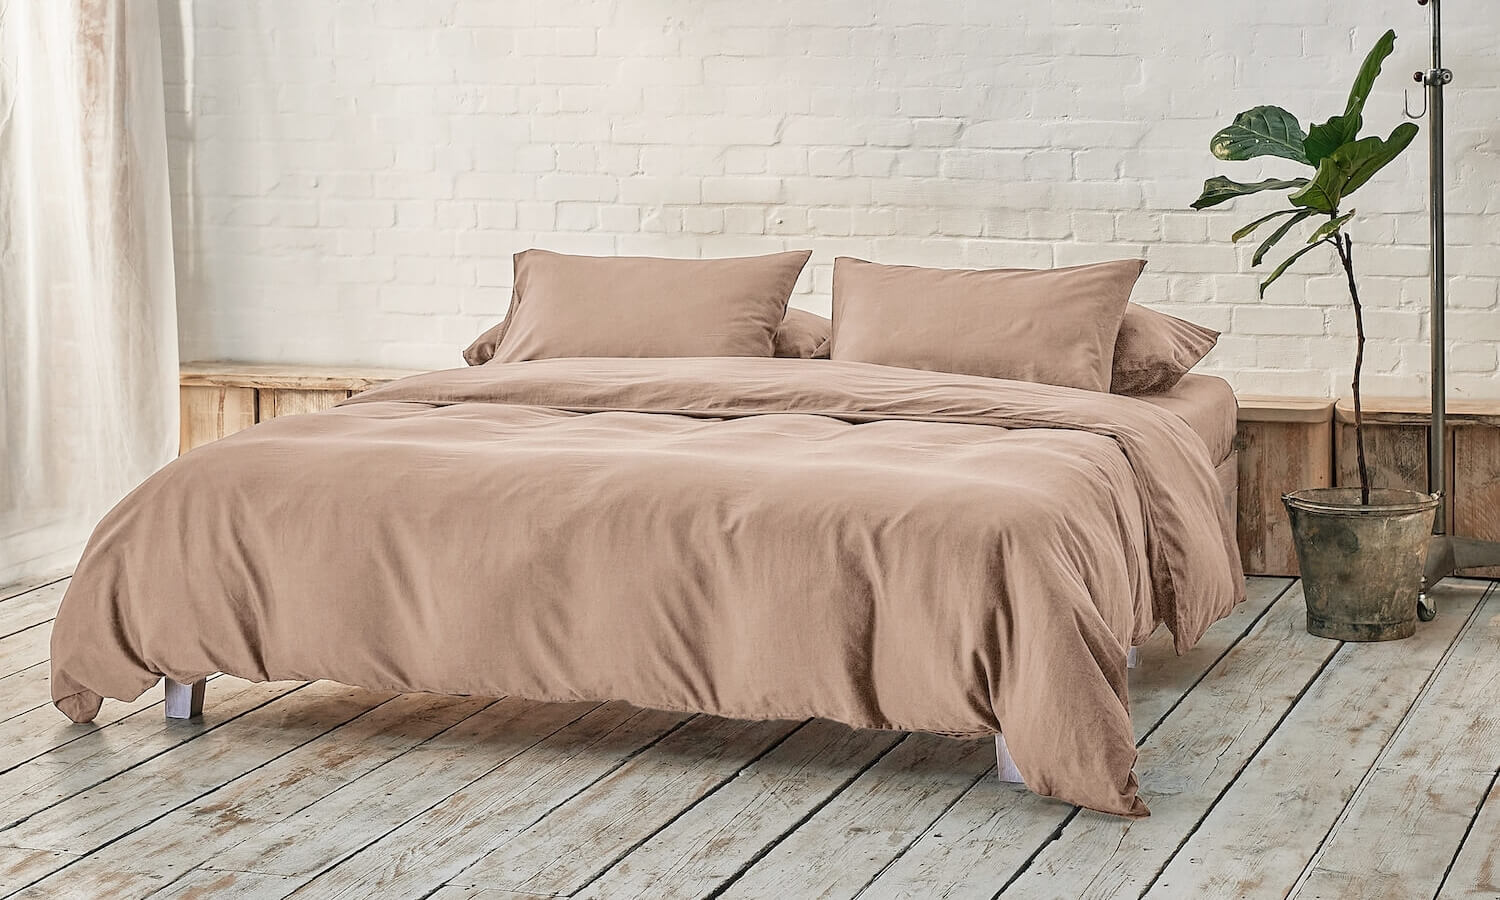 beige duvet cover, two pillowcases, and bottom sheet on double bed in apartment with plant and wooden flooring